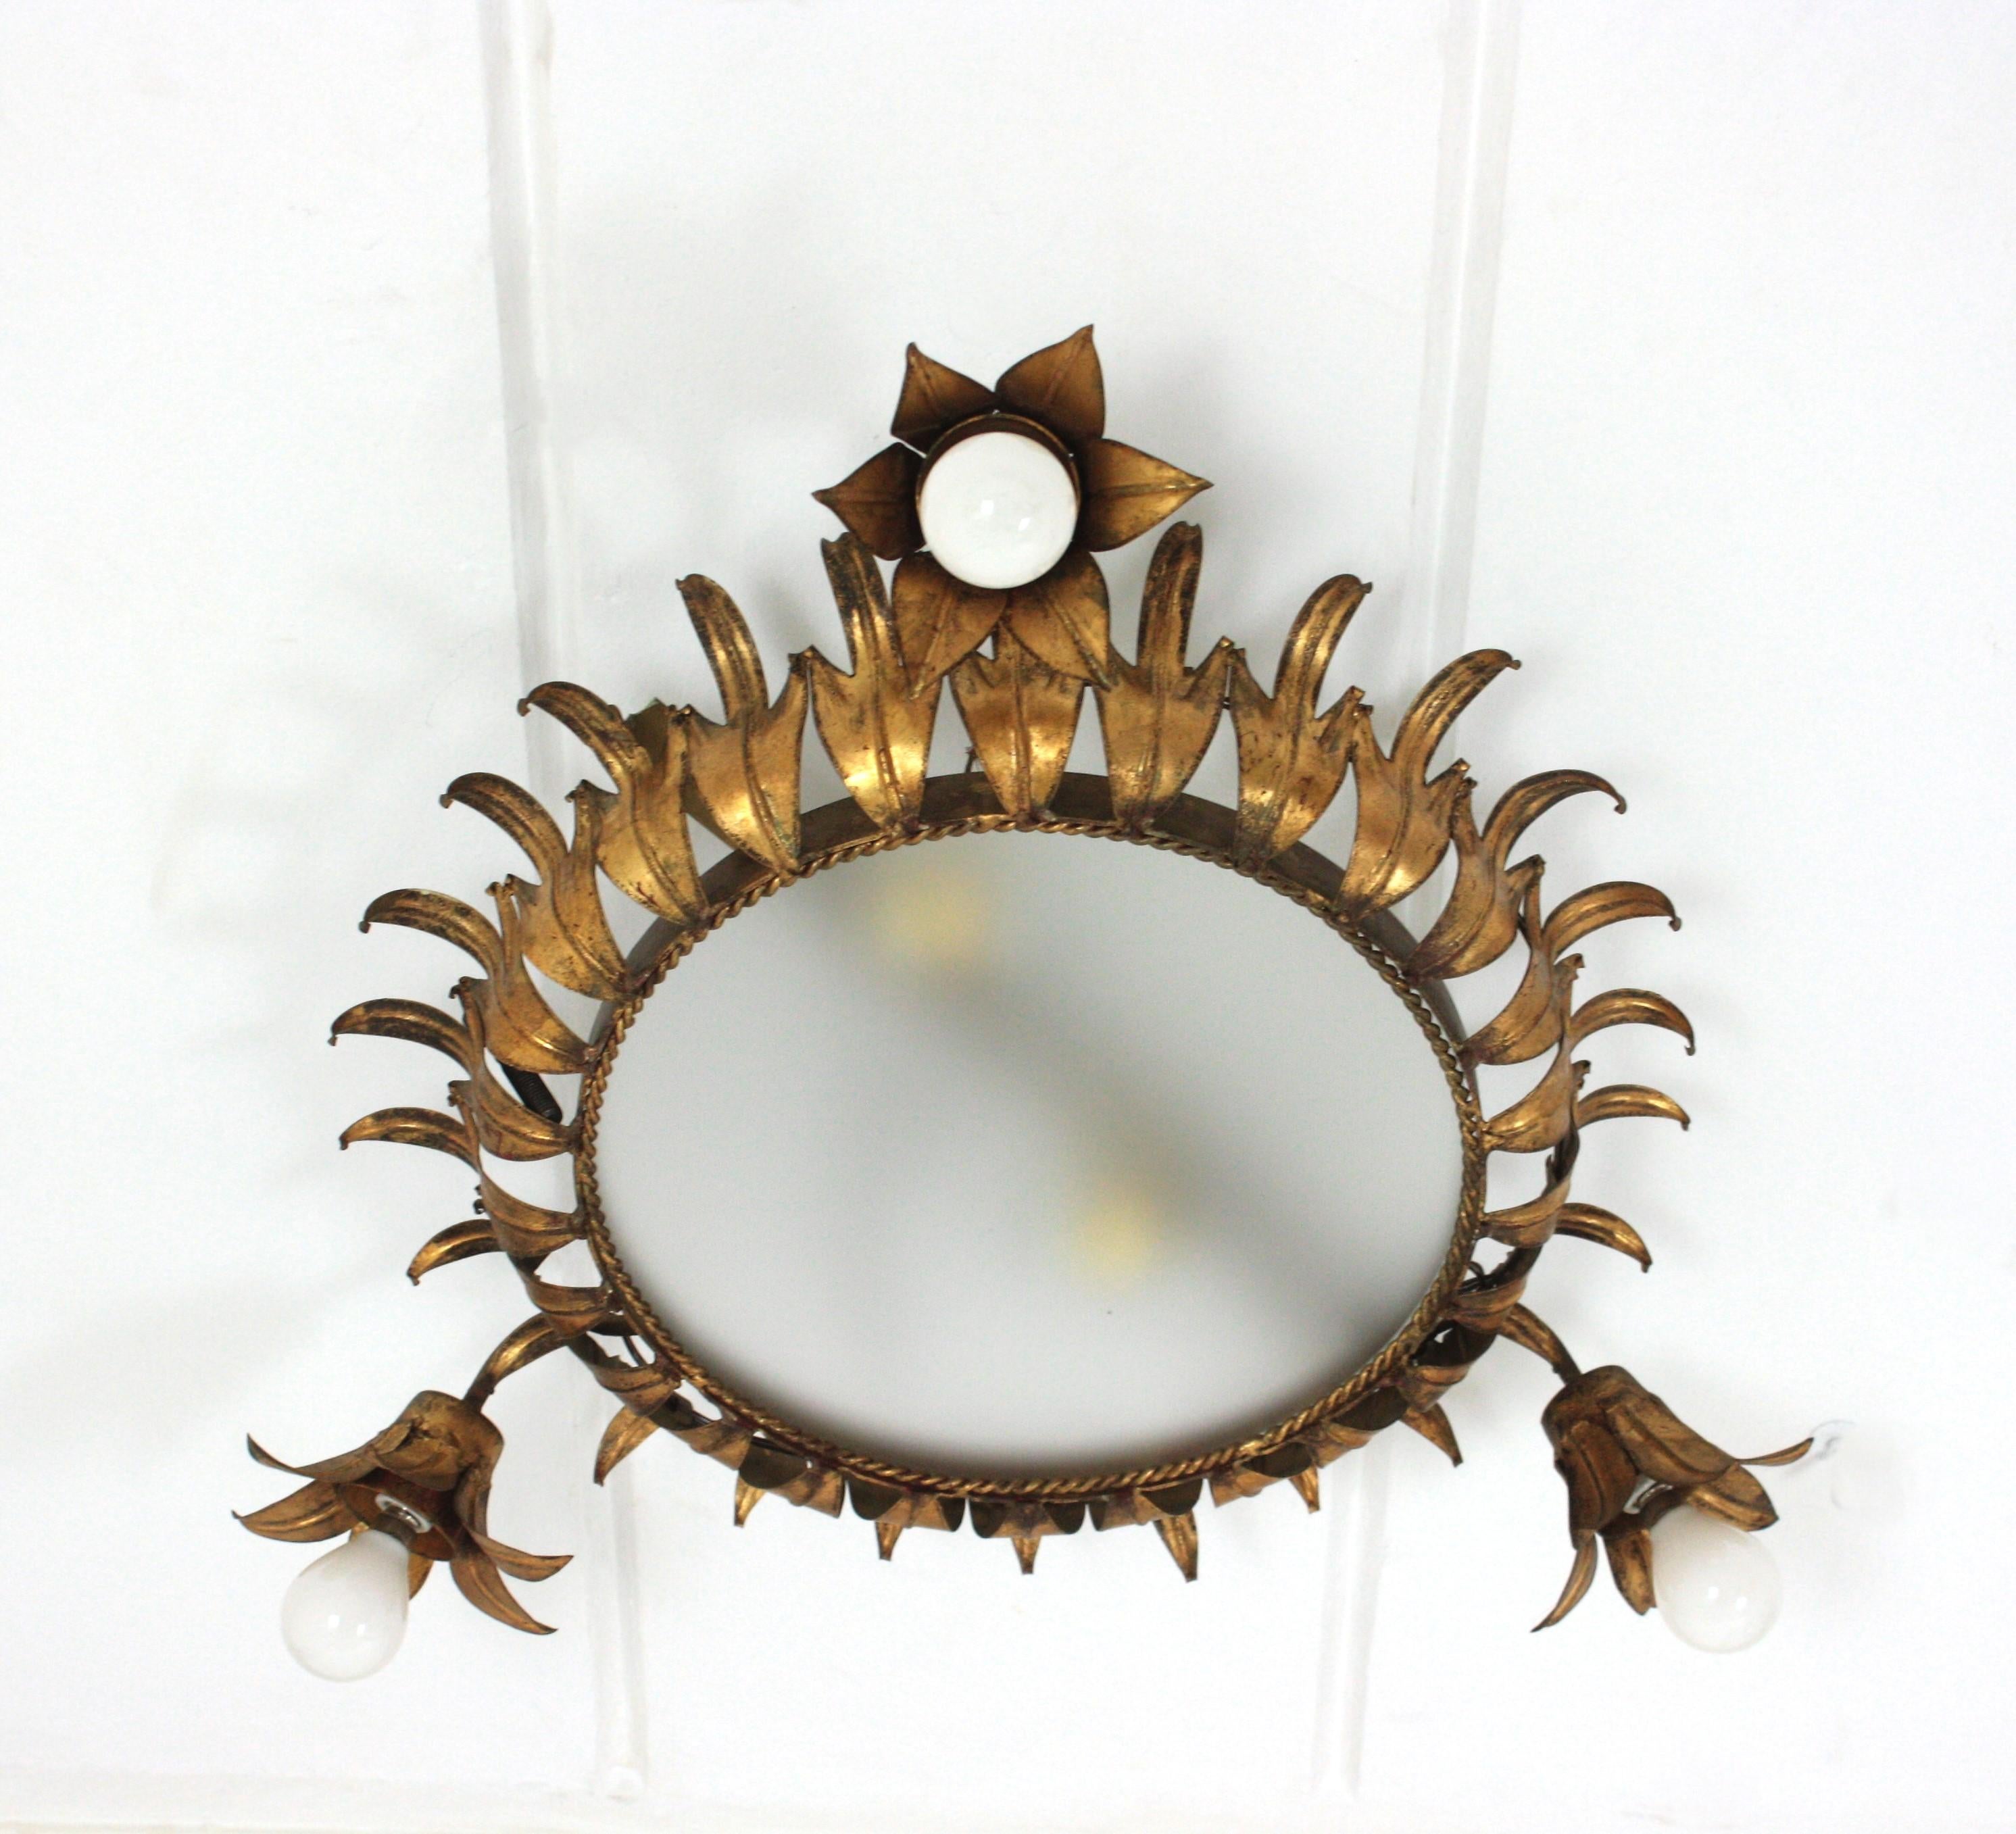 Sunburst Crown Flush Mount with triple flower detail, Gilt Iron. Spain, 1950s
This handcrafted crown sunburst ceiling light fixture features a crown shaped flush mount with frosted glass difusser. The sunburst crown light body is made of iron leaves